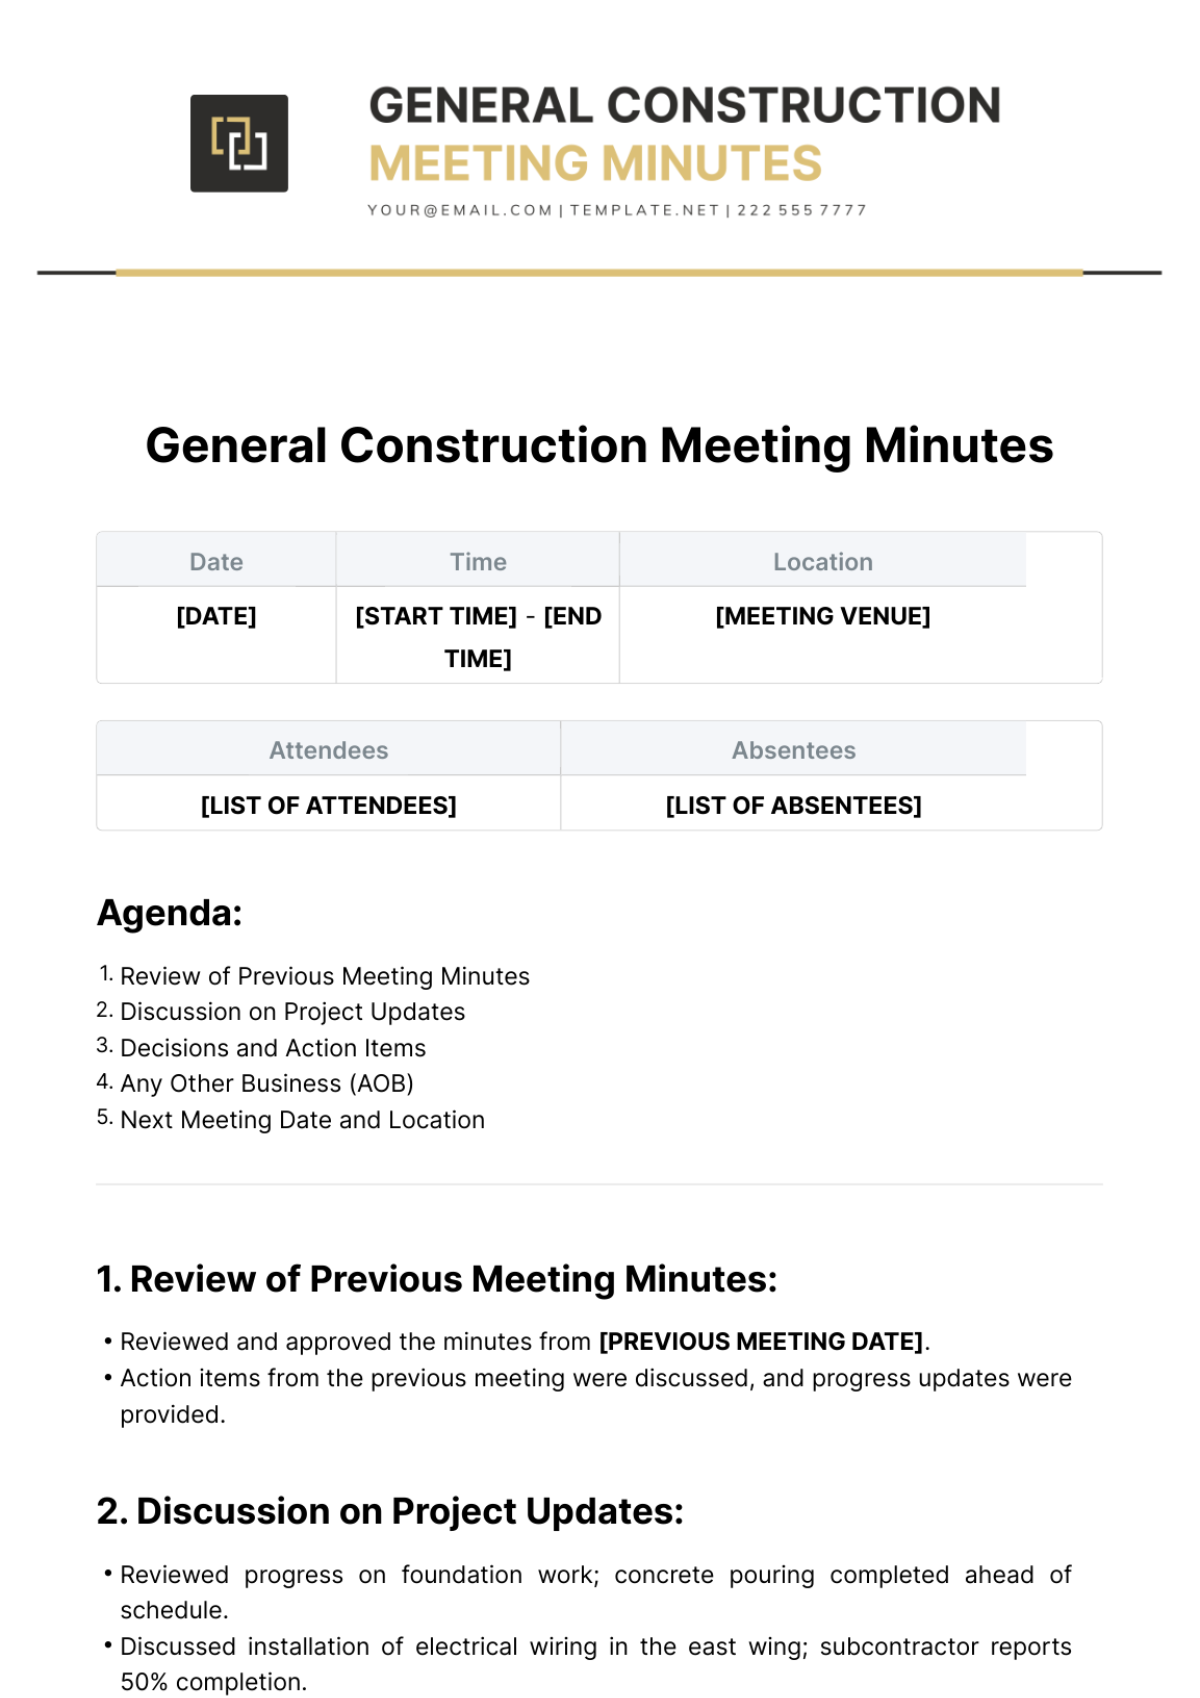 General Construction Meeting Minutes Template